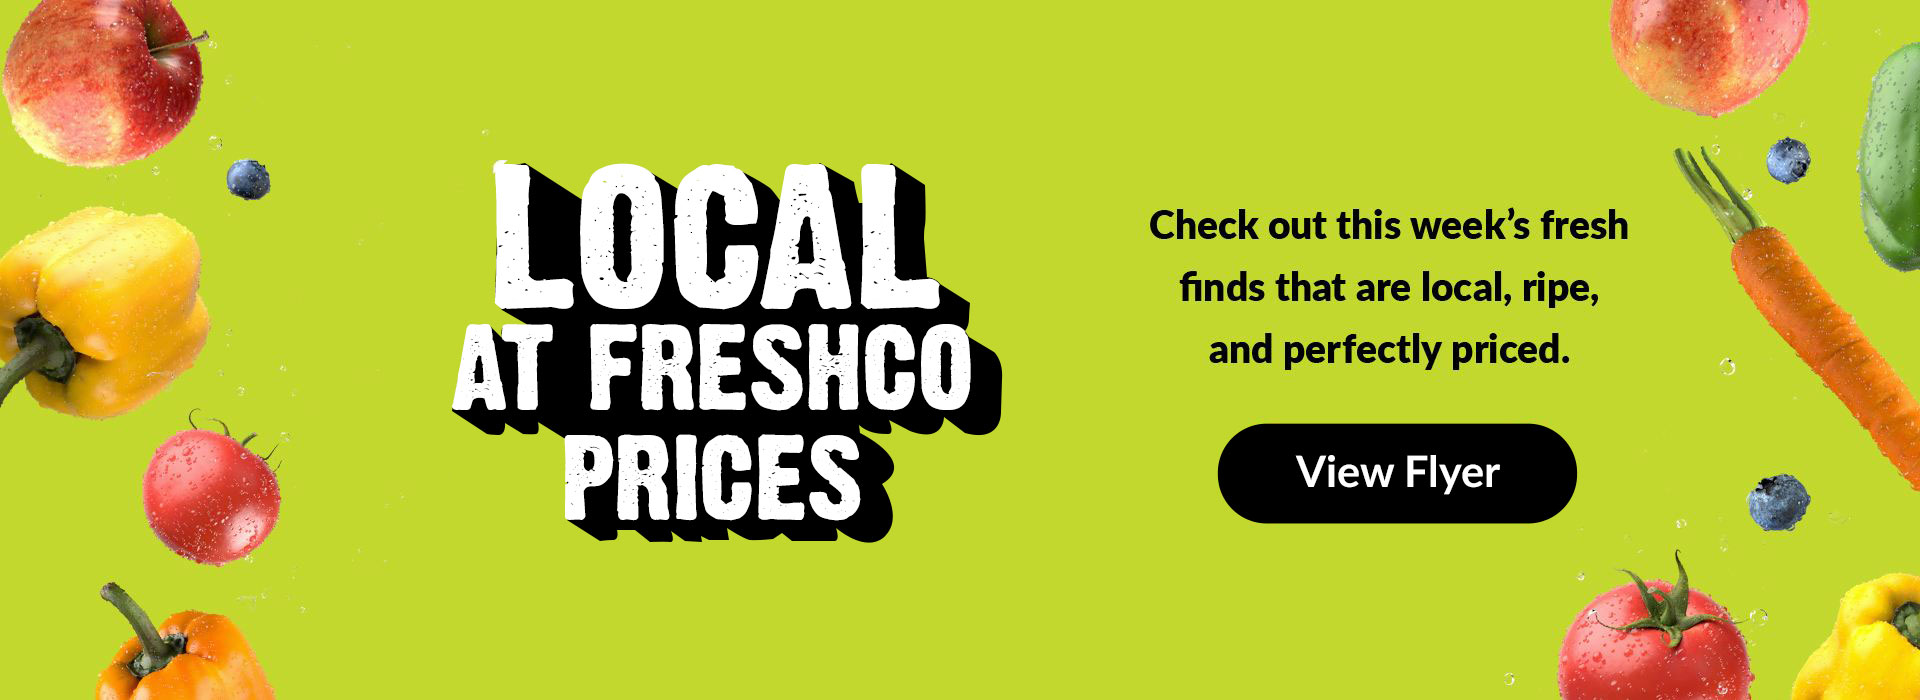 Text Reading 'Local at Freshco prices. Check out this week's fresh finds that are local, ripe, and perfectly priced. For more details click on the View Flyer button given below.'